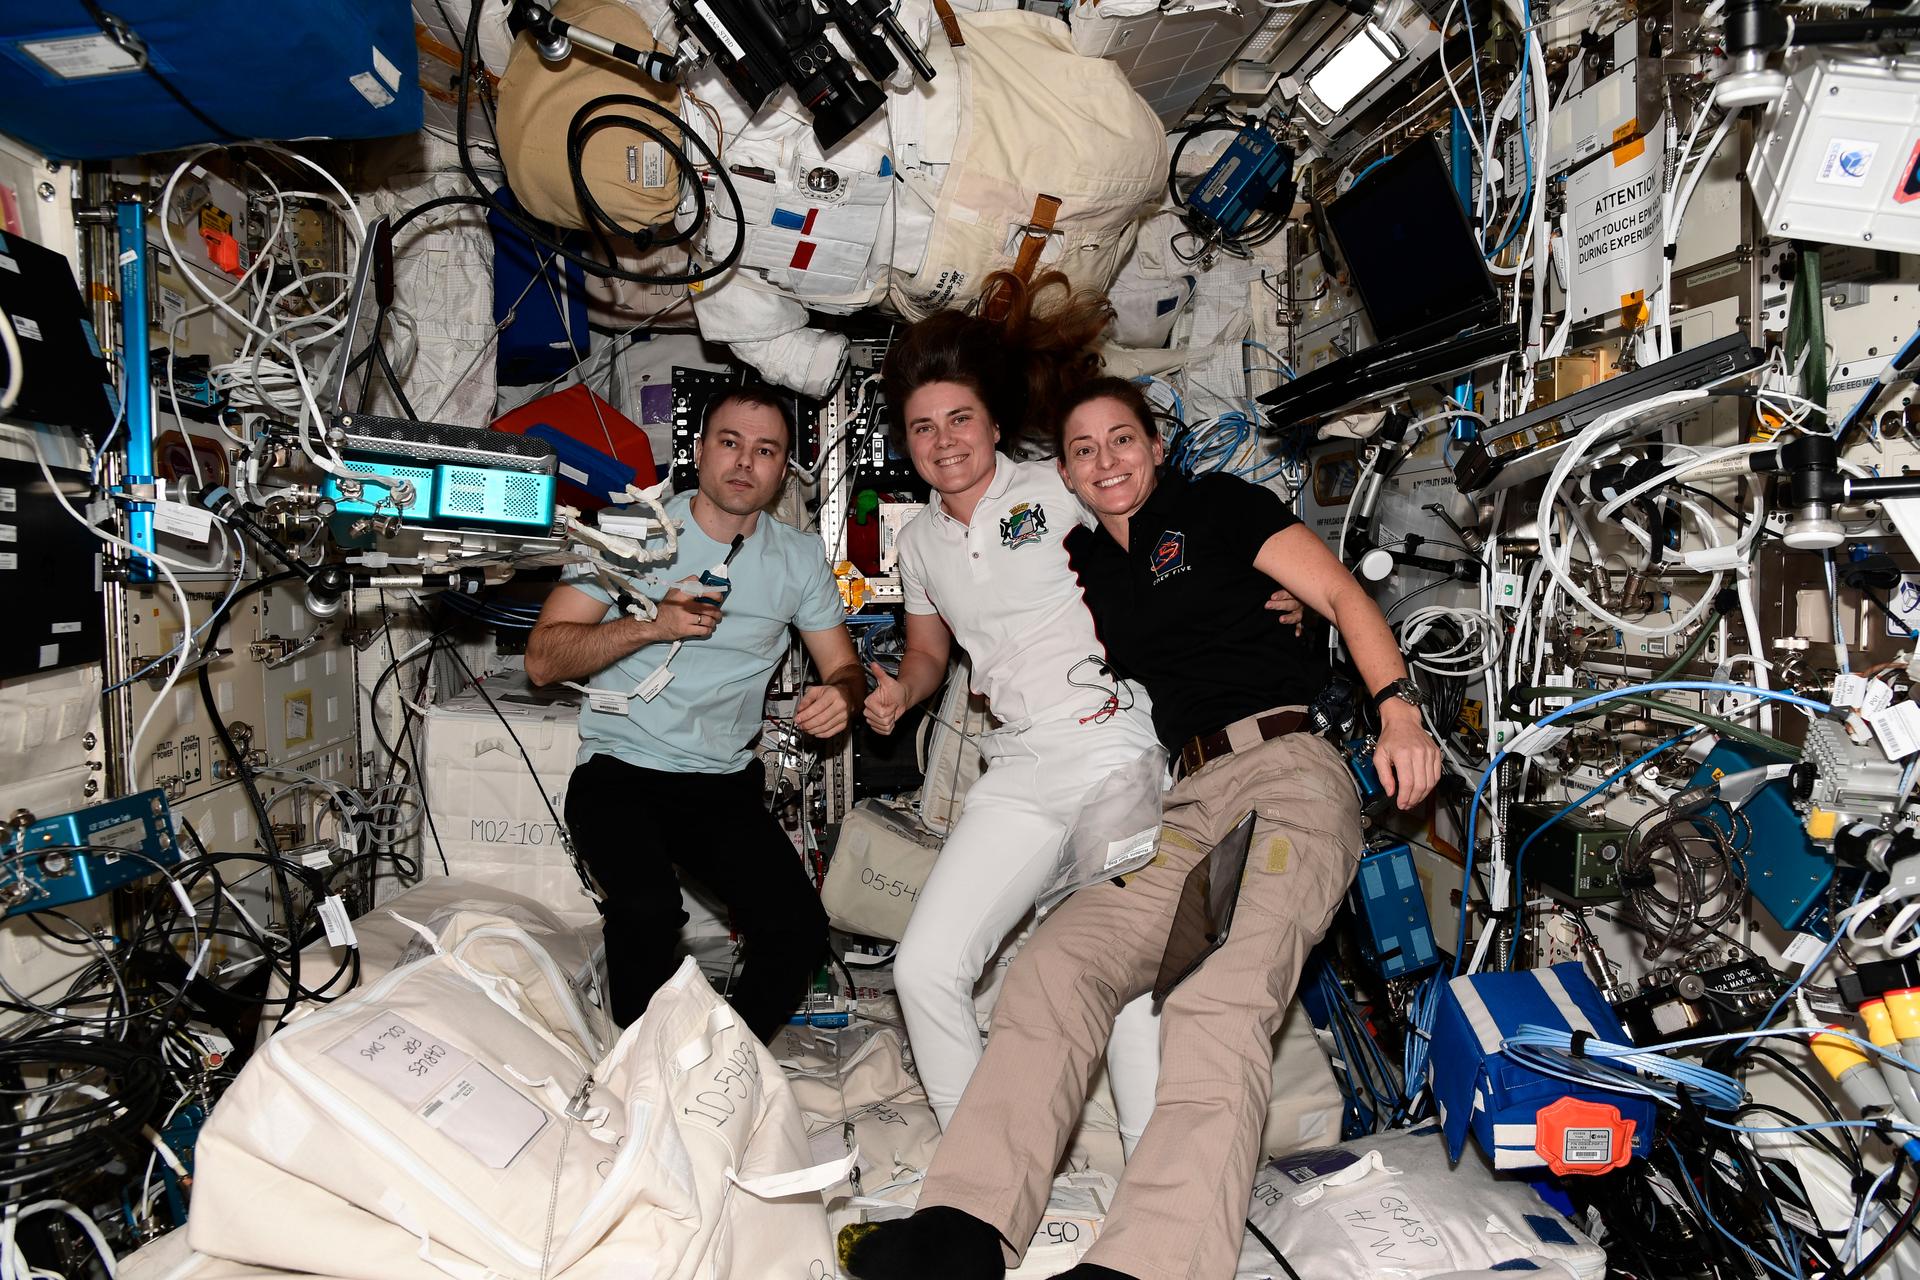 image of the crew posing for a photo in the space station